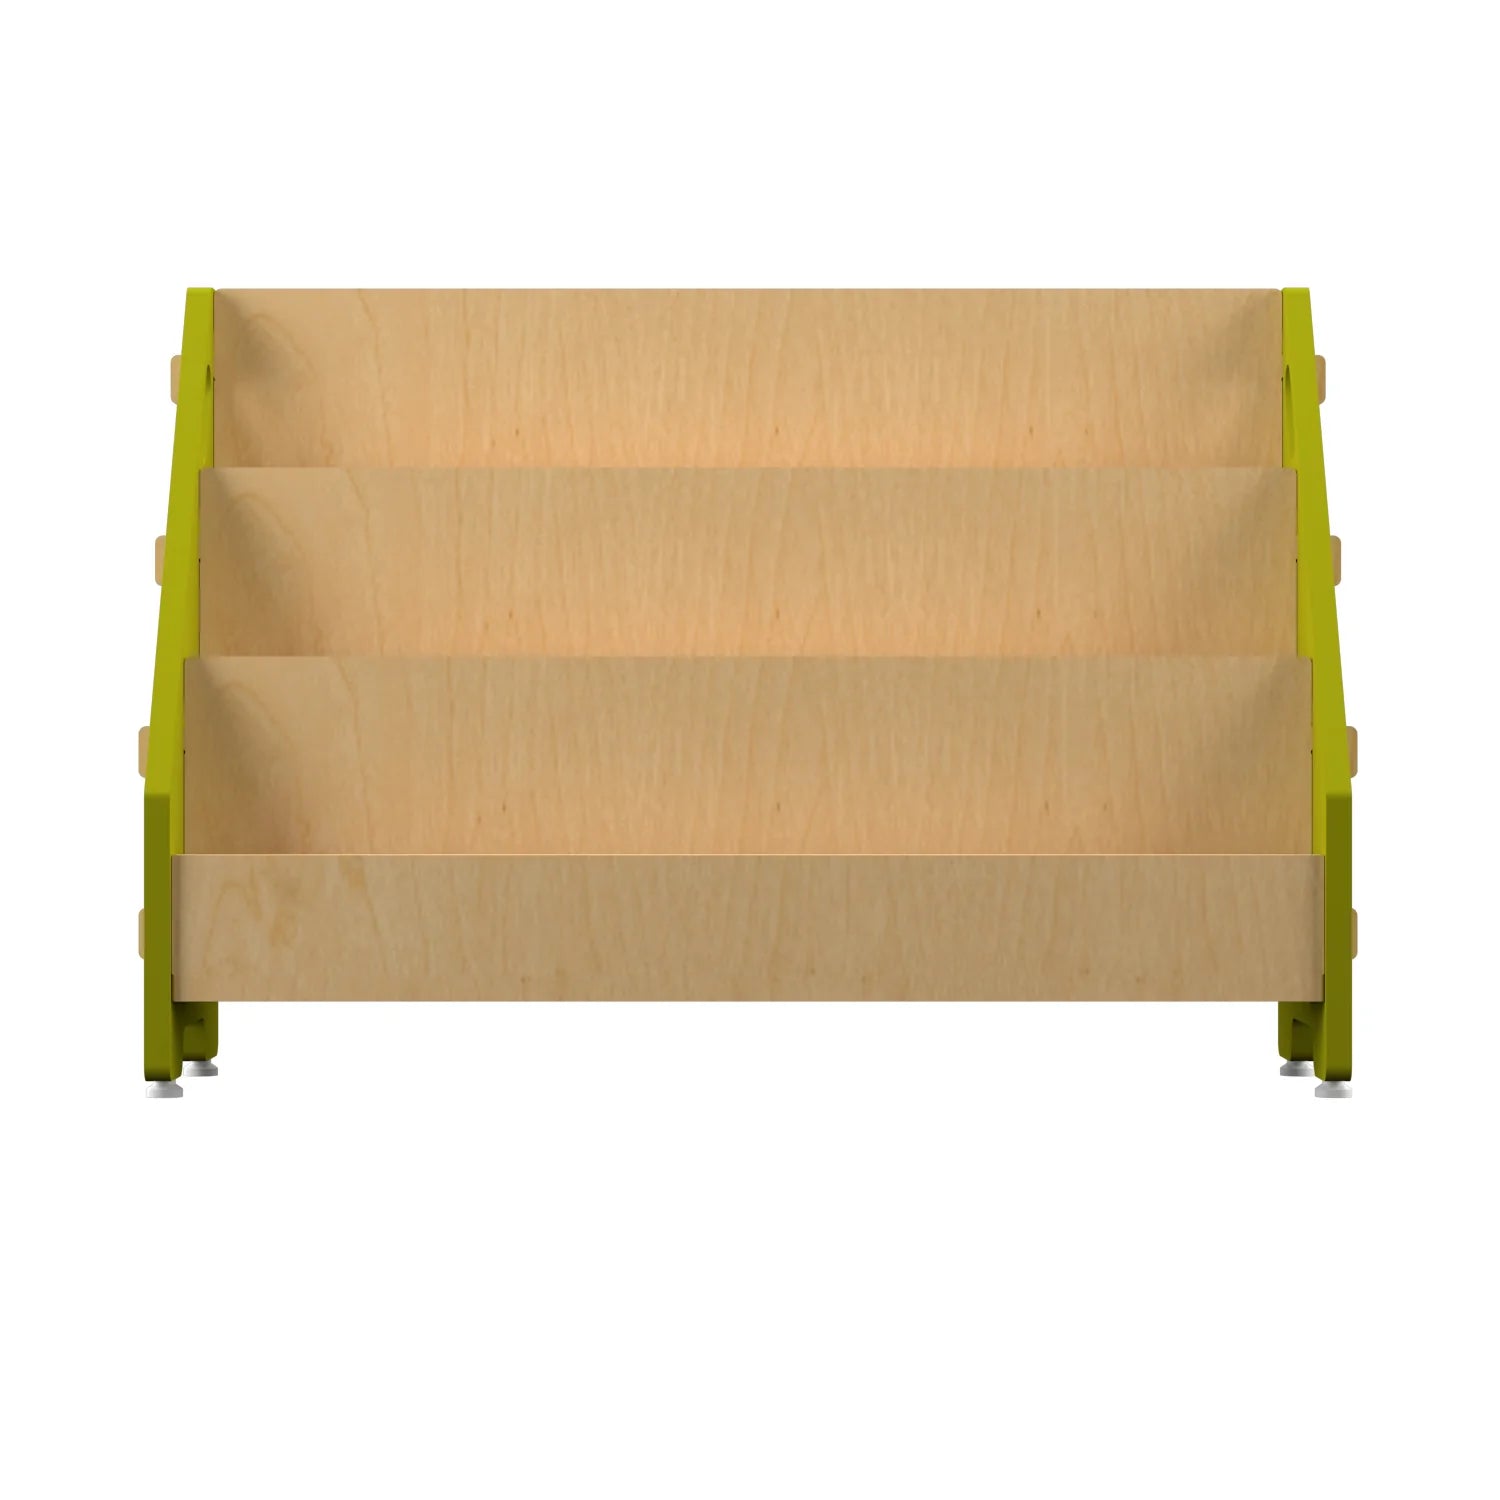 Buy Ochre Olive Wooden Book Rack - Green - Front View - SkilloToys.com